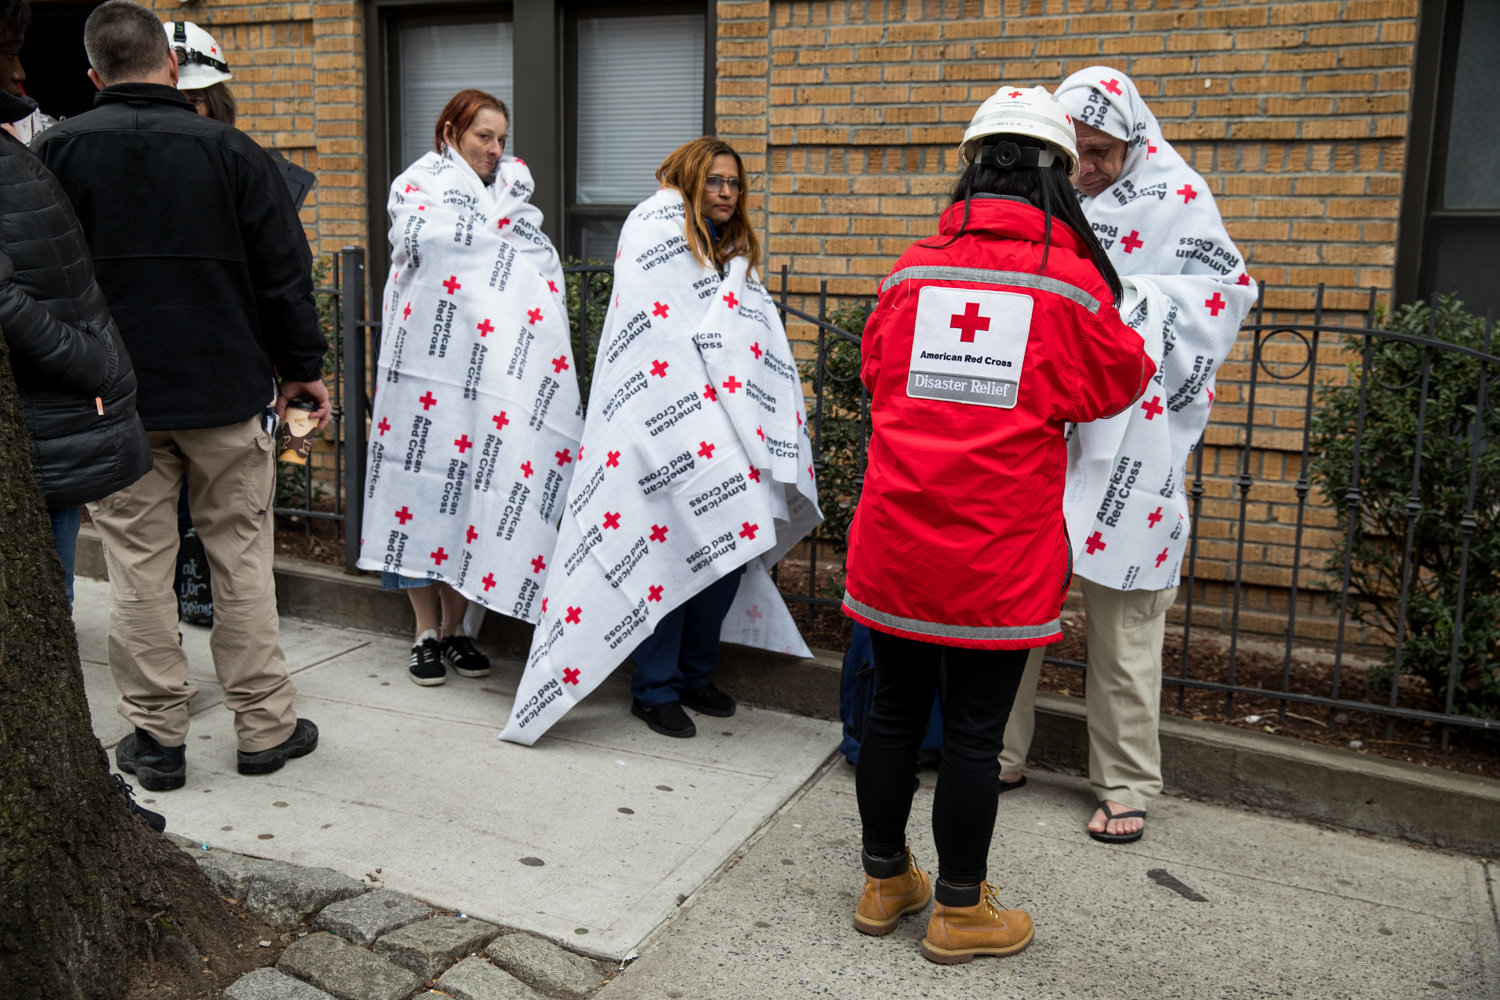 A member of the American Red Cross helps residents of 215 W. 242nd St., where a fire broke out Friday morning.